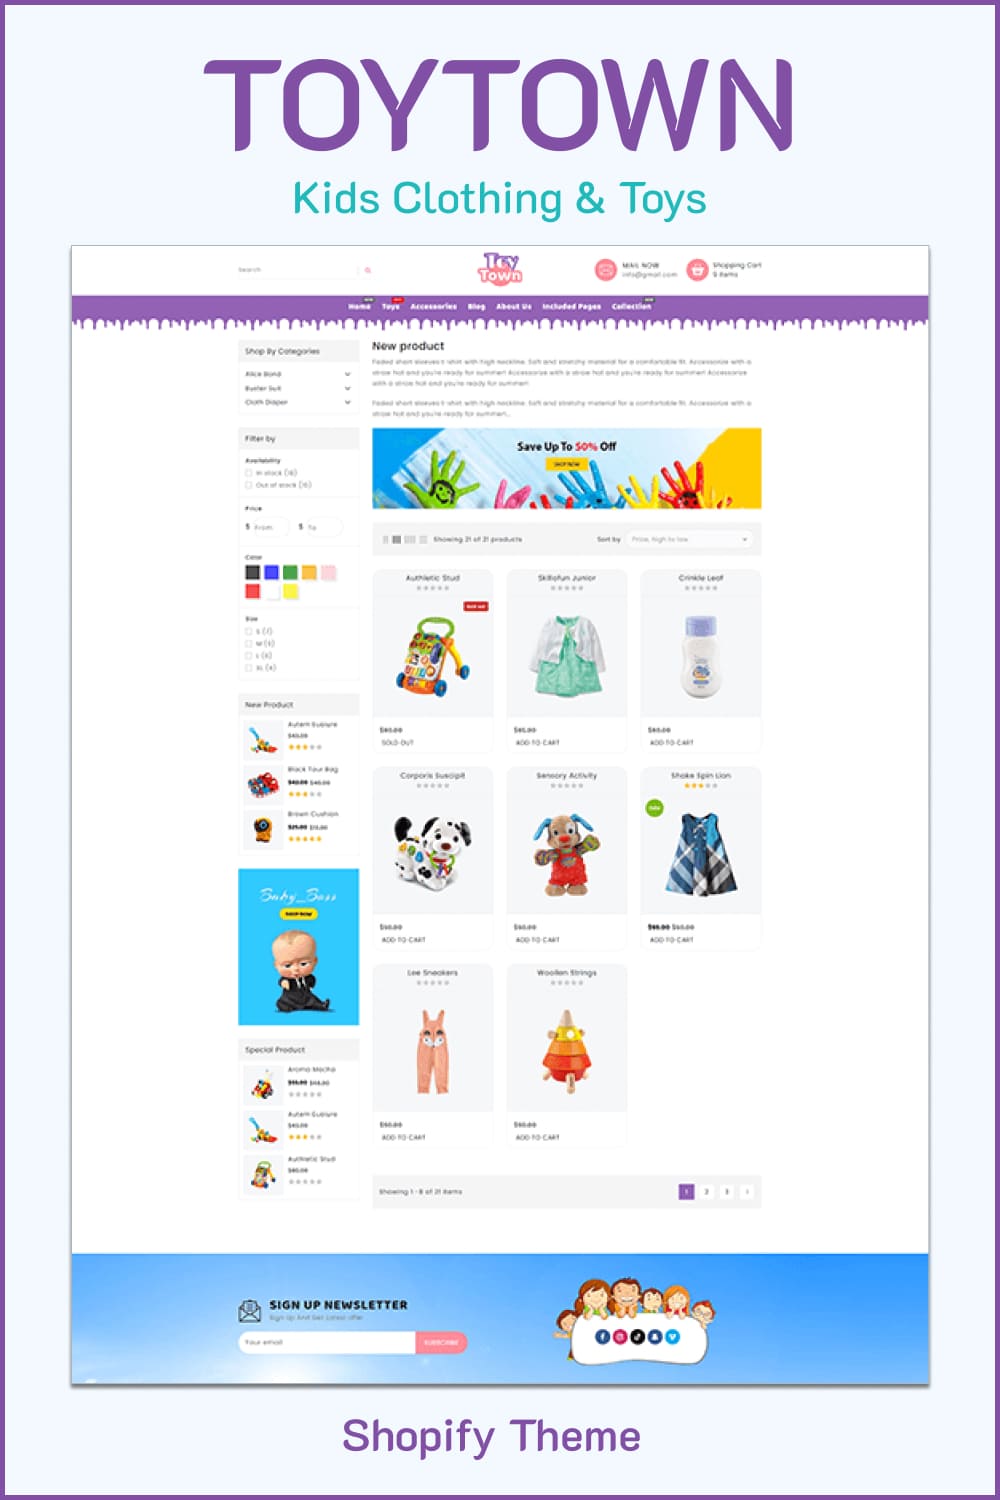 New products of Toytown shopify theme.